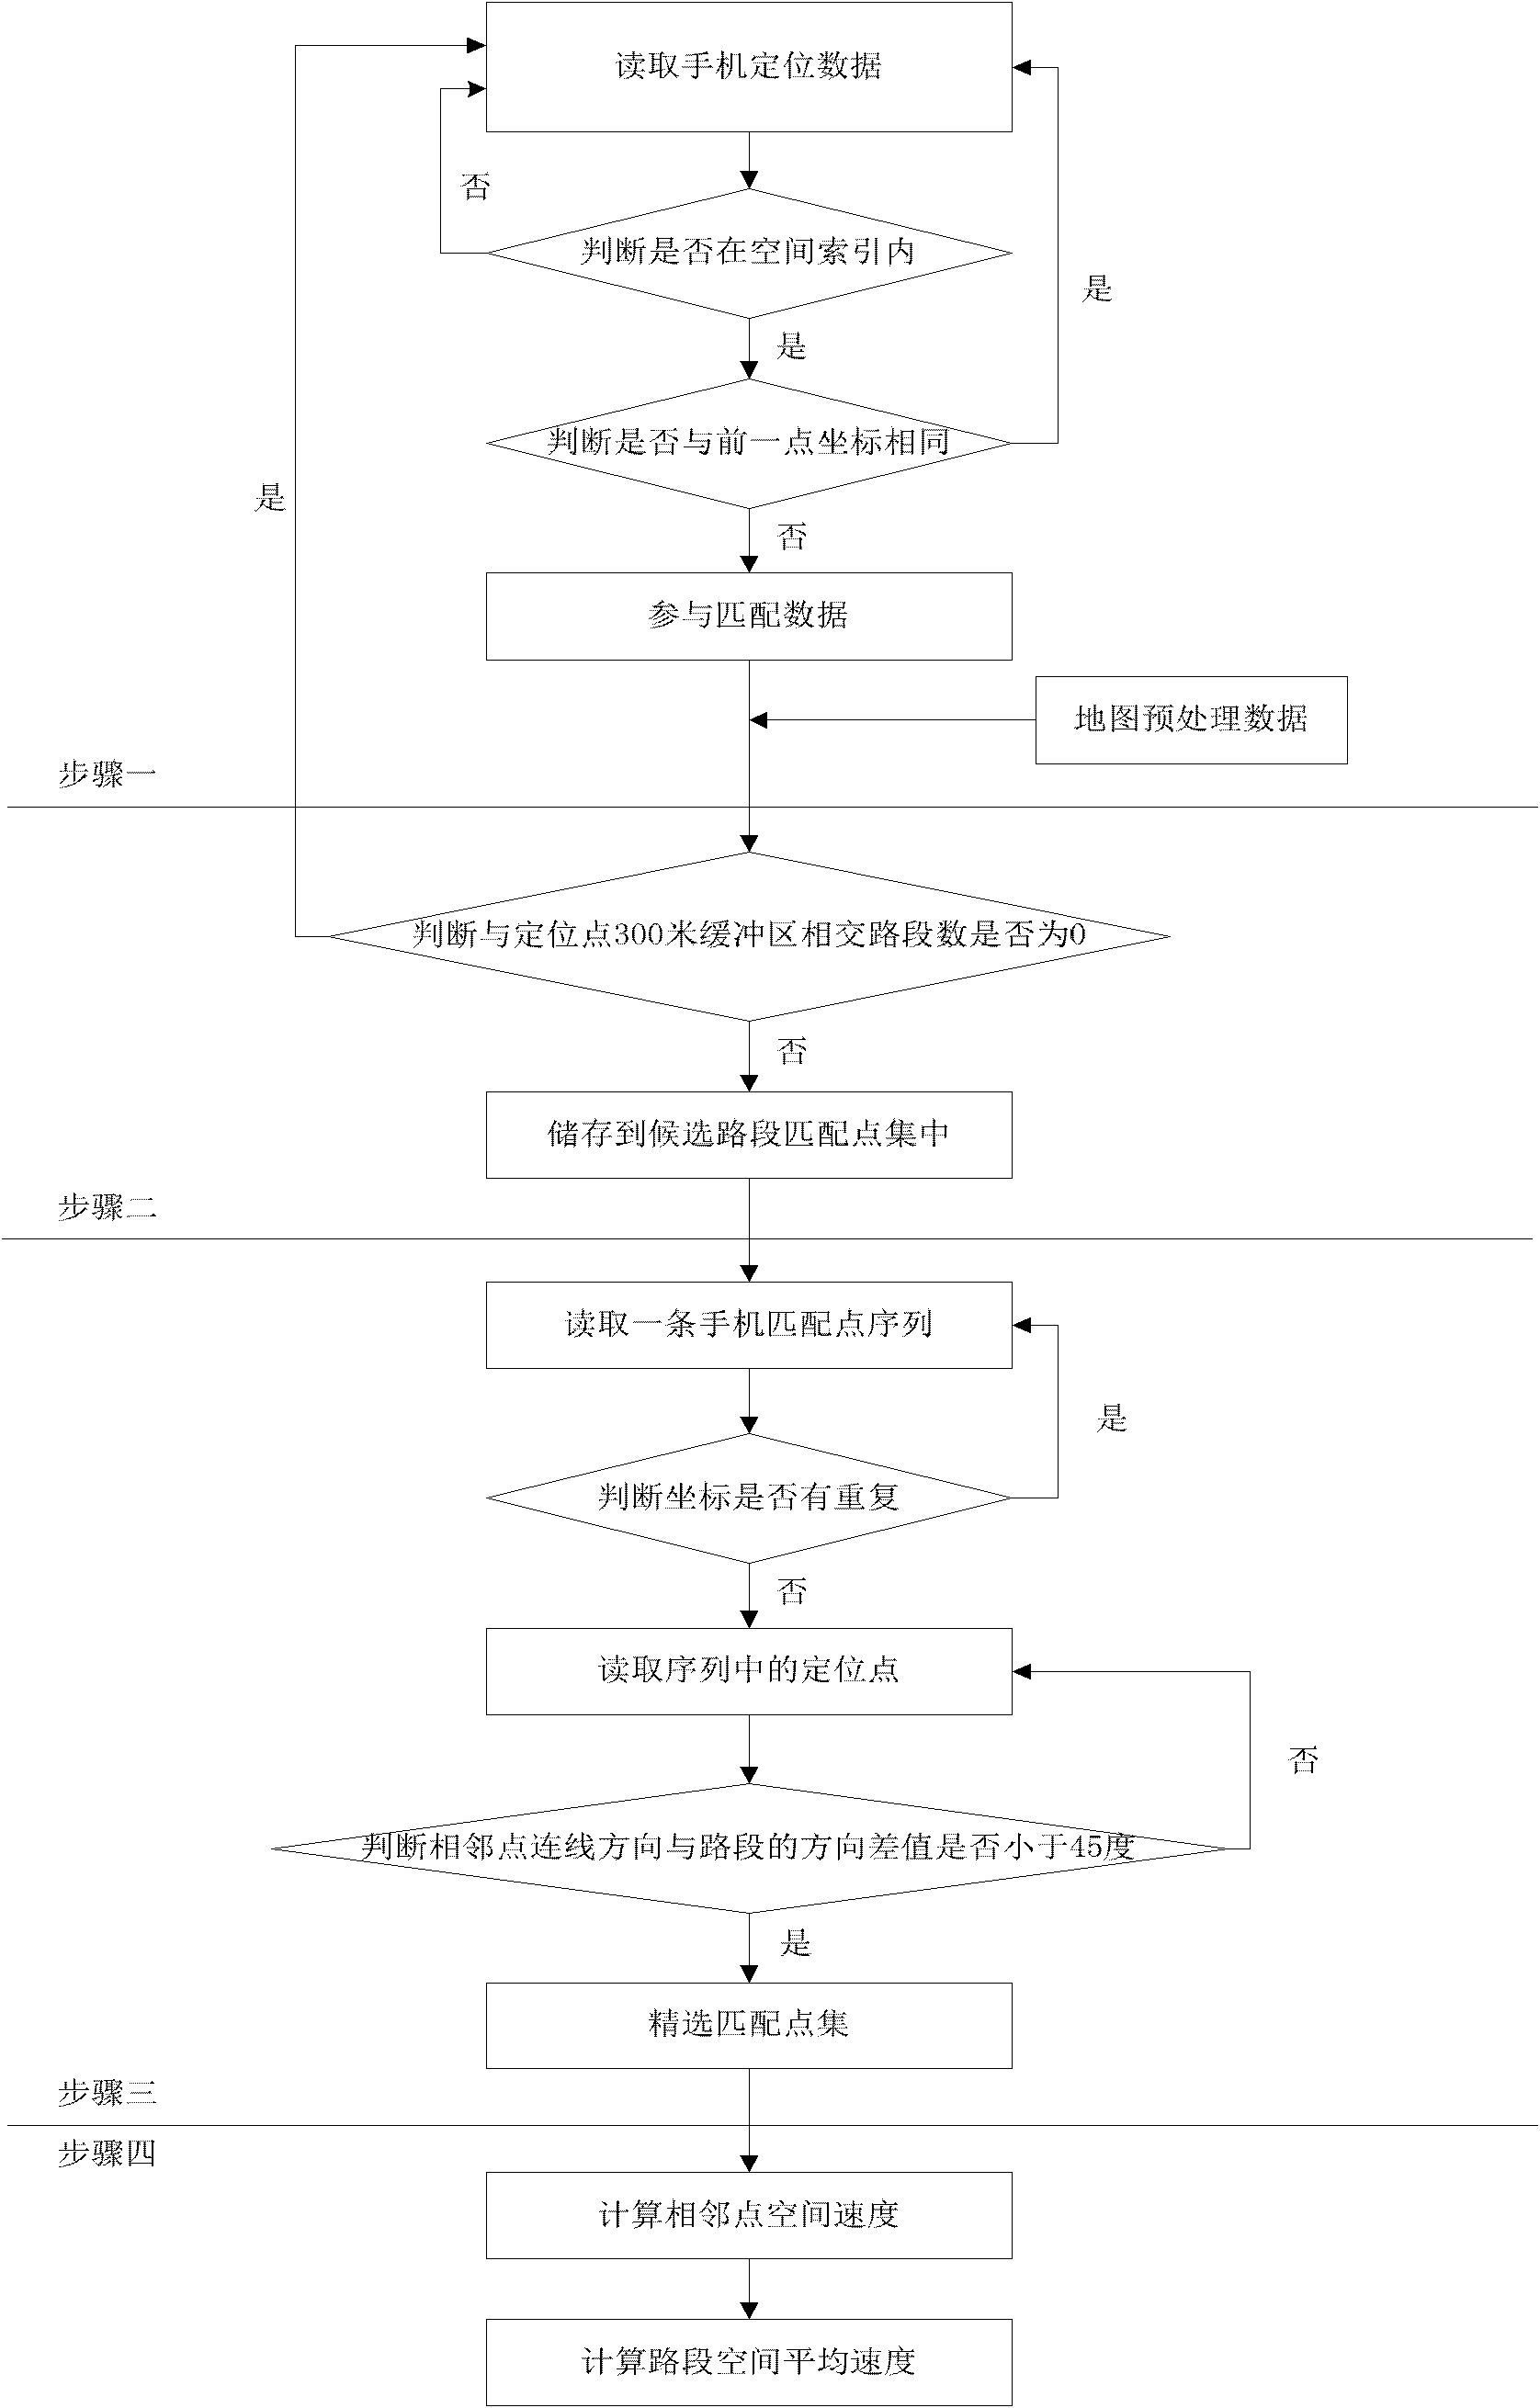 Method for extracting real-time urban road traffic flow data based on mobile phone positioning data